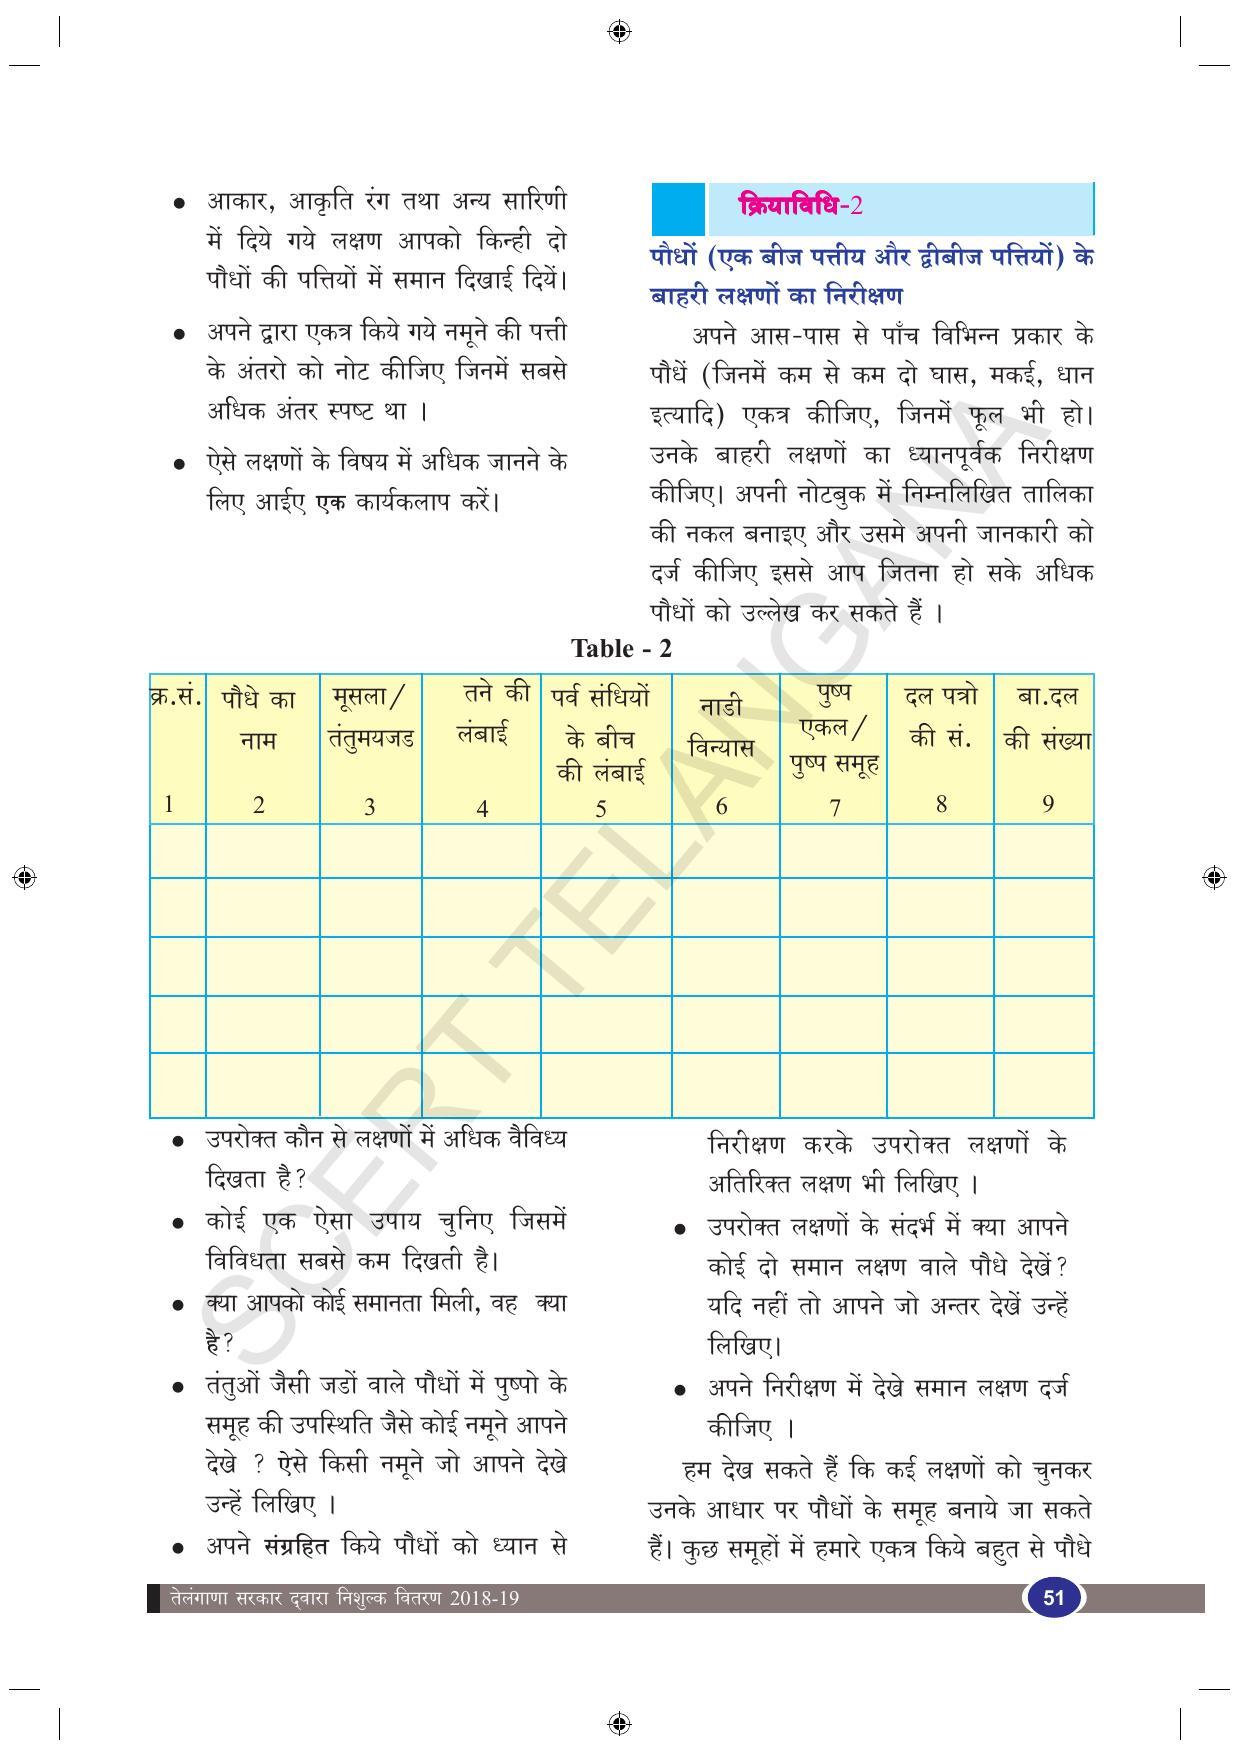 TS SCERT Class 9 Biological Science (Hindi Medium) Text Book - Page 63